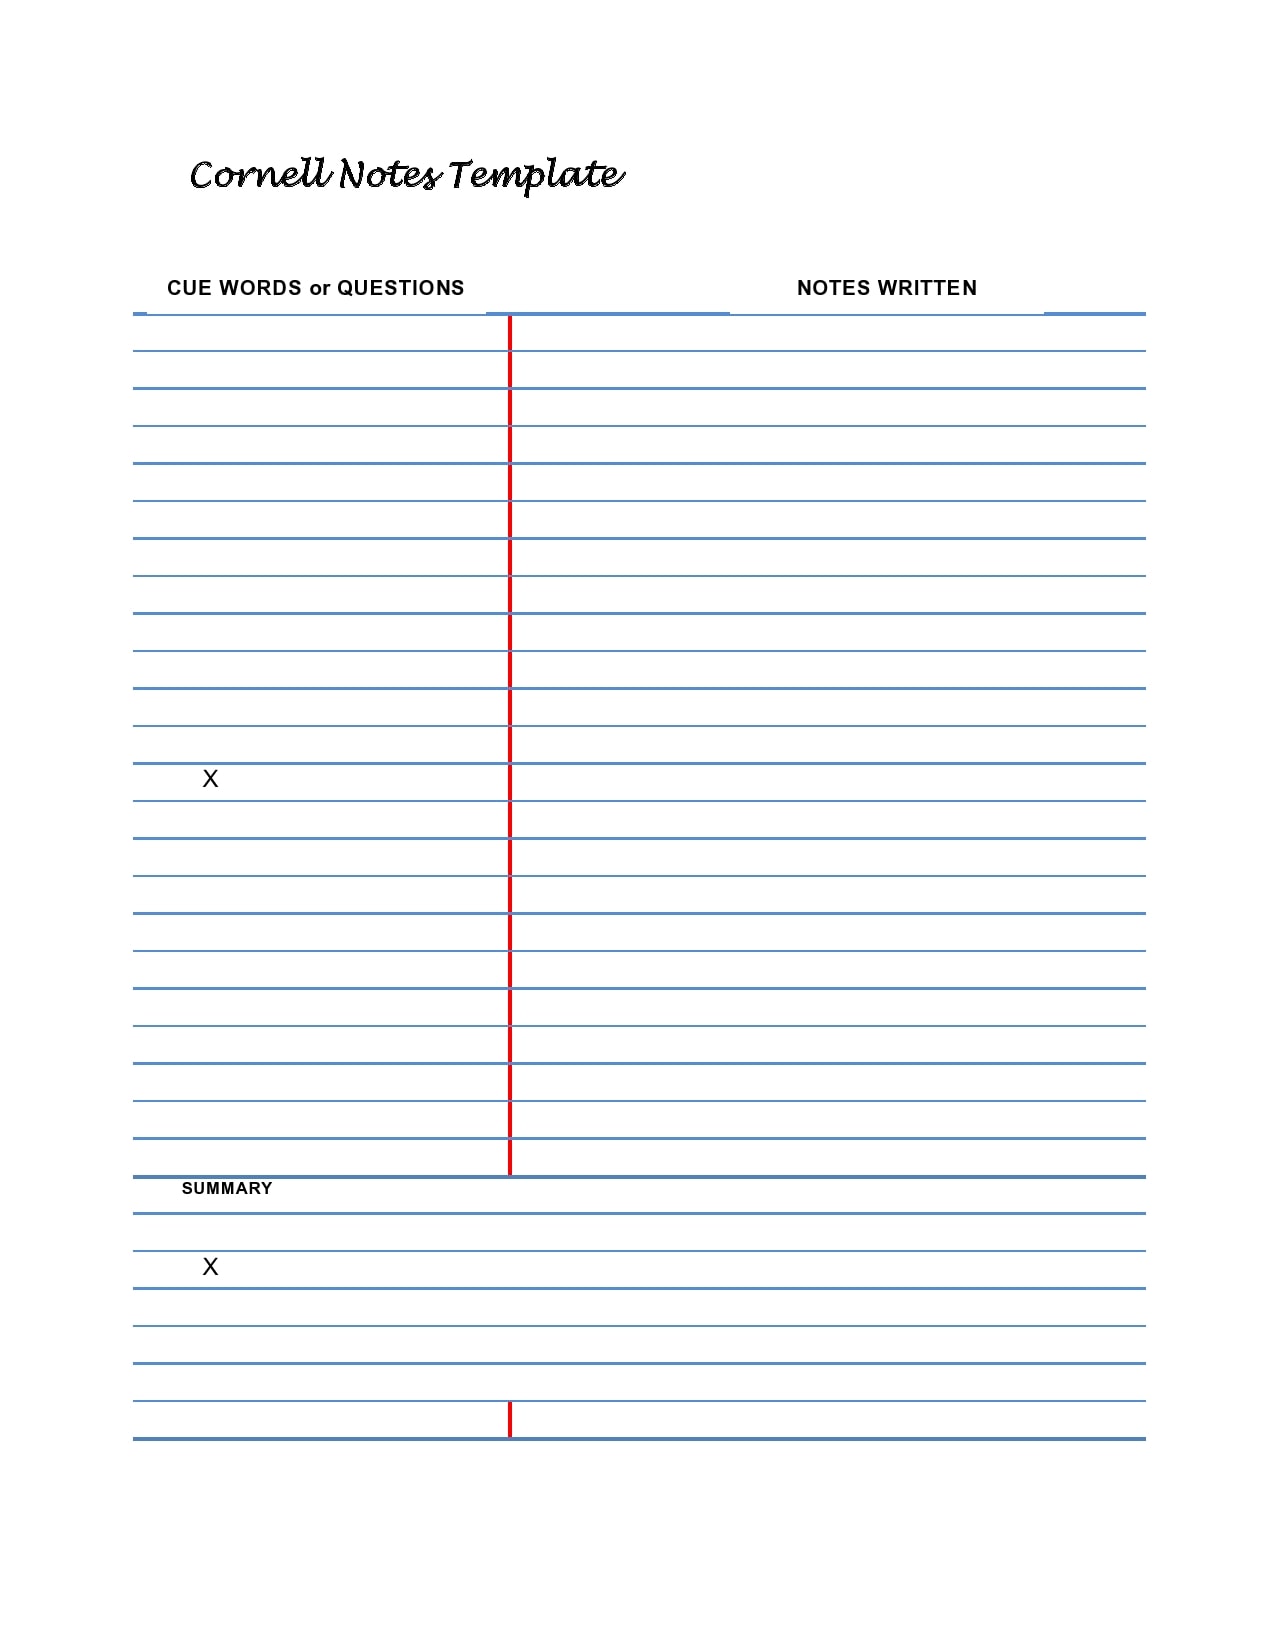 Detail Cornell Notes Template Nomer 50